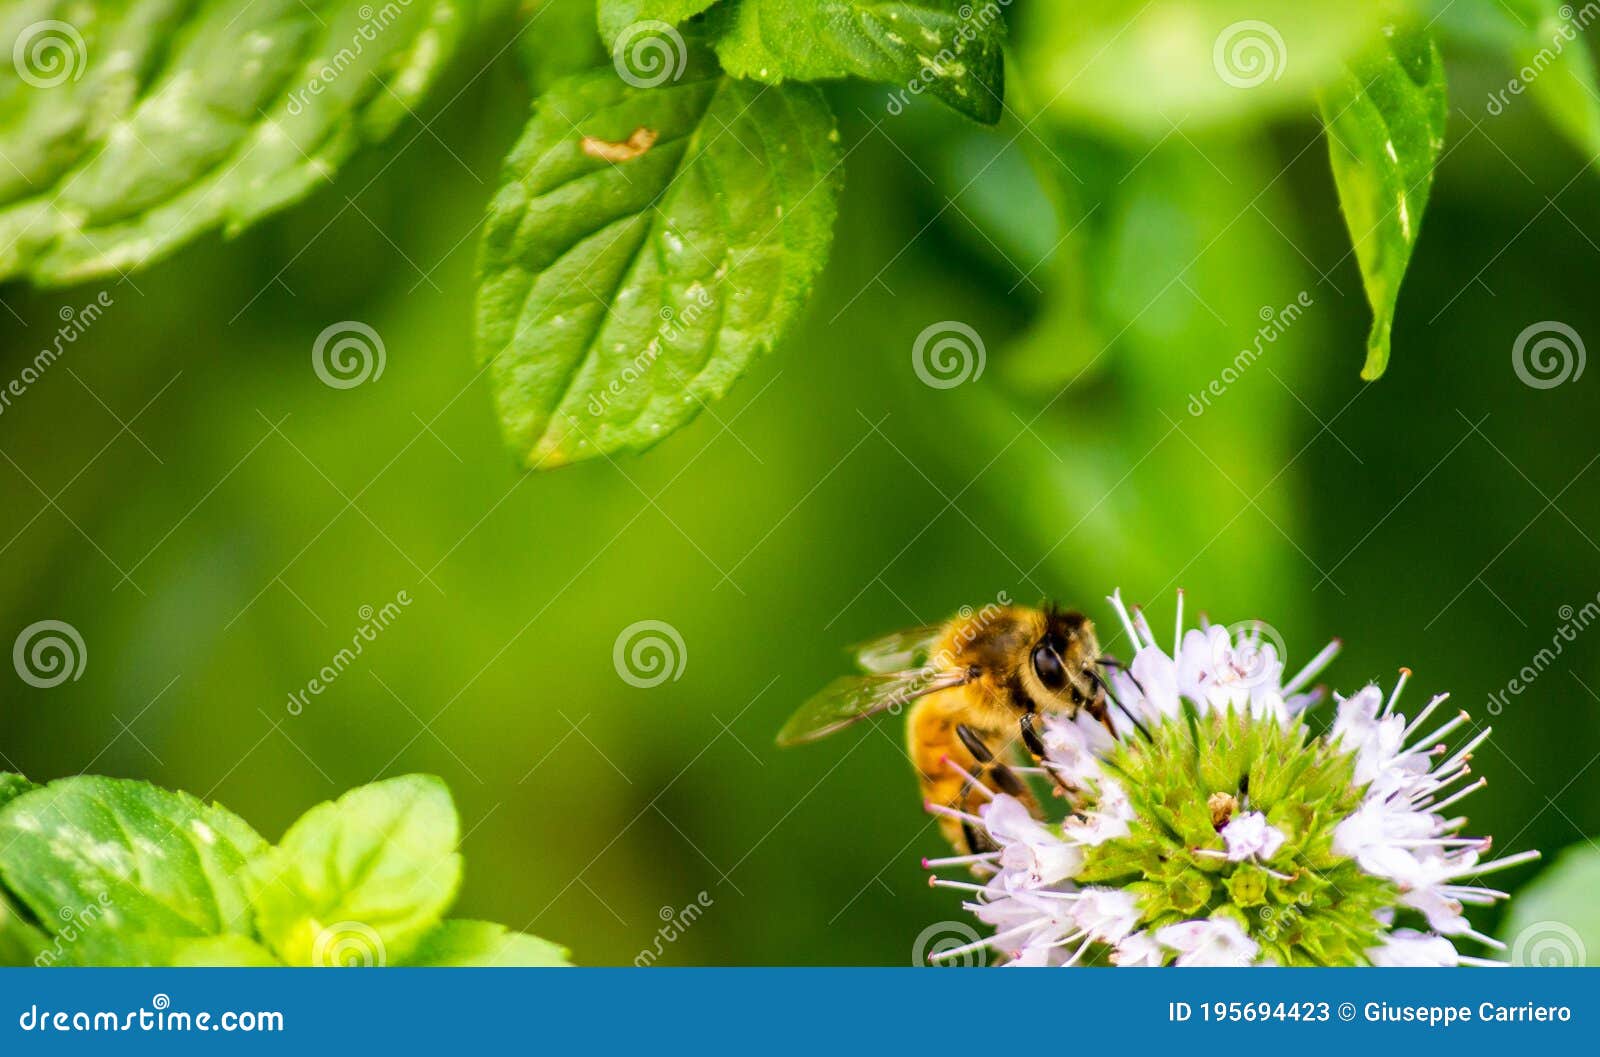 a laborious bee that collects nectar from mint flowers contributes to the pollination of flowers.